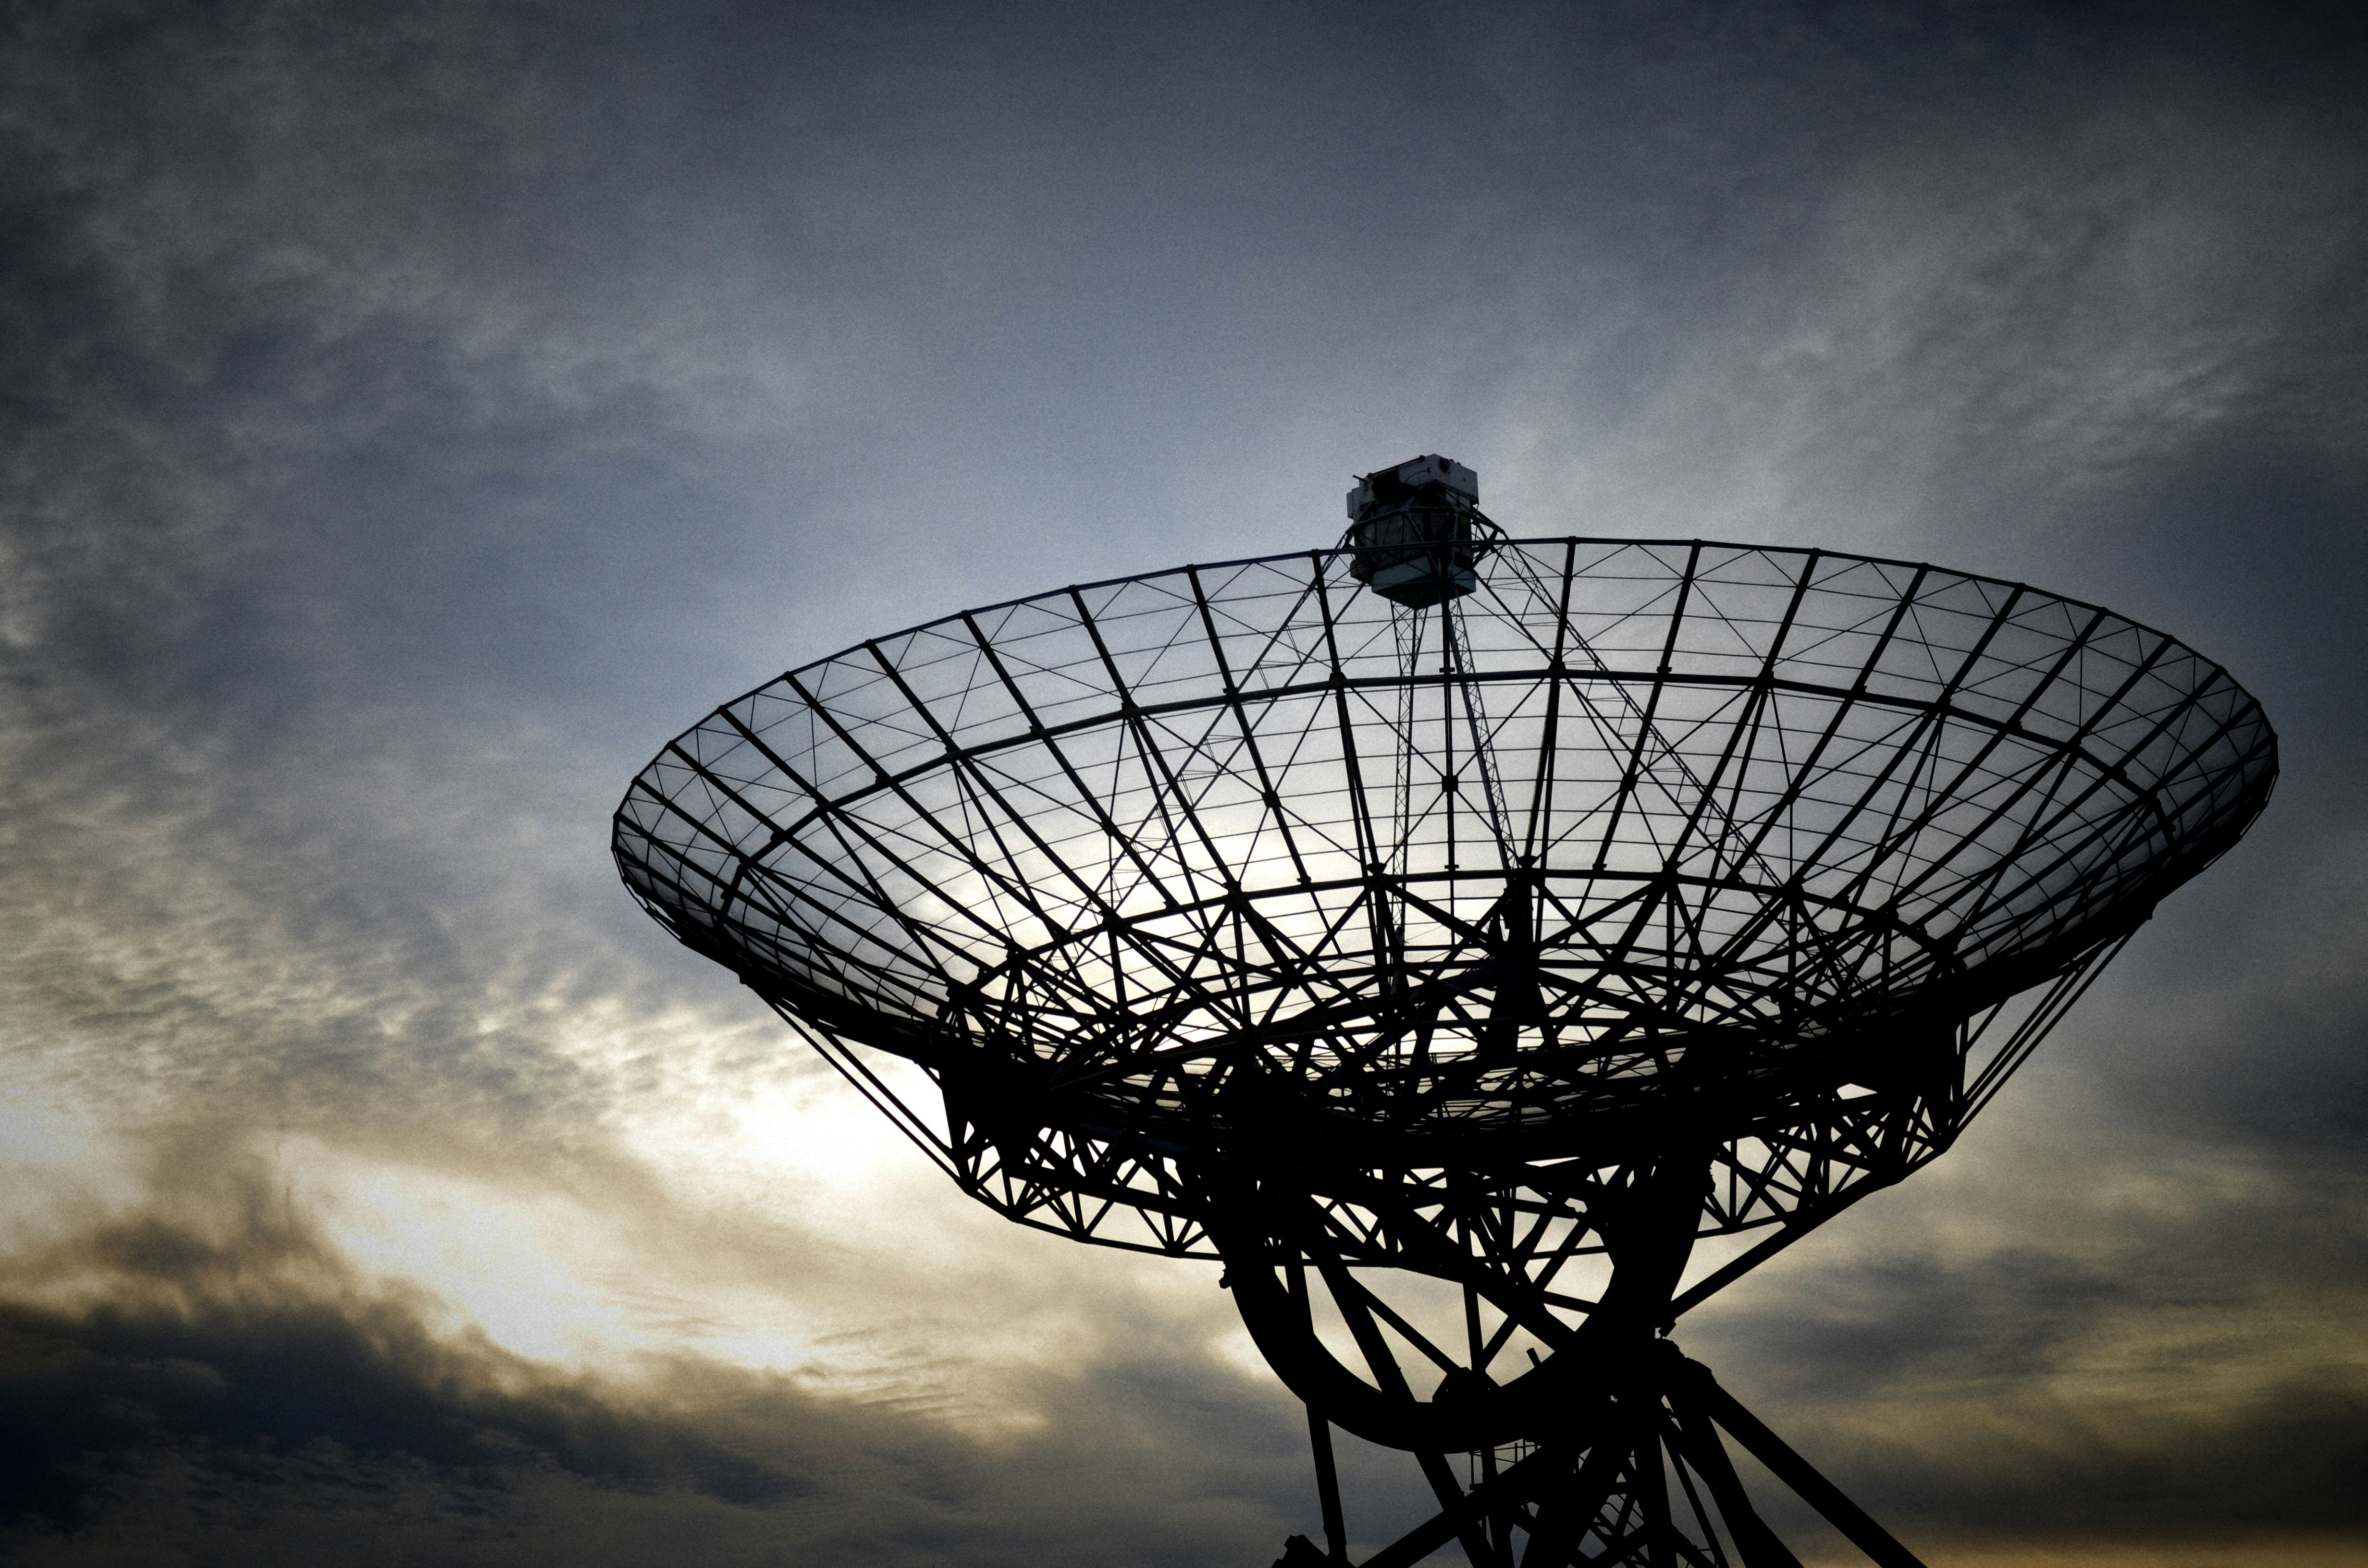 Photo of a large satellite dish in front of a cloudy evening sky